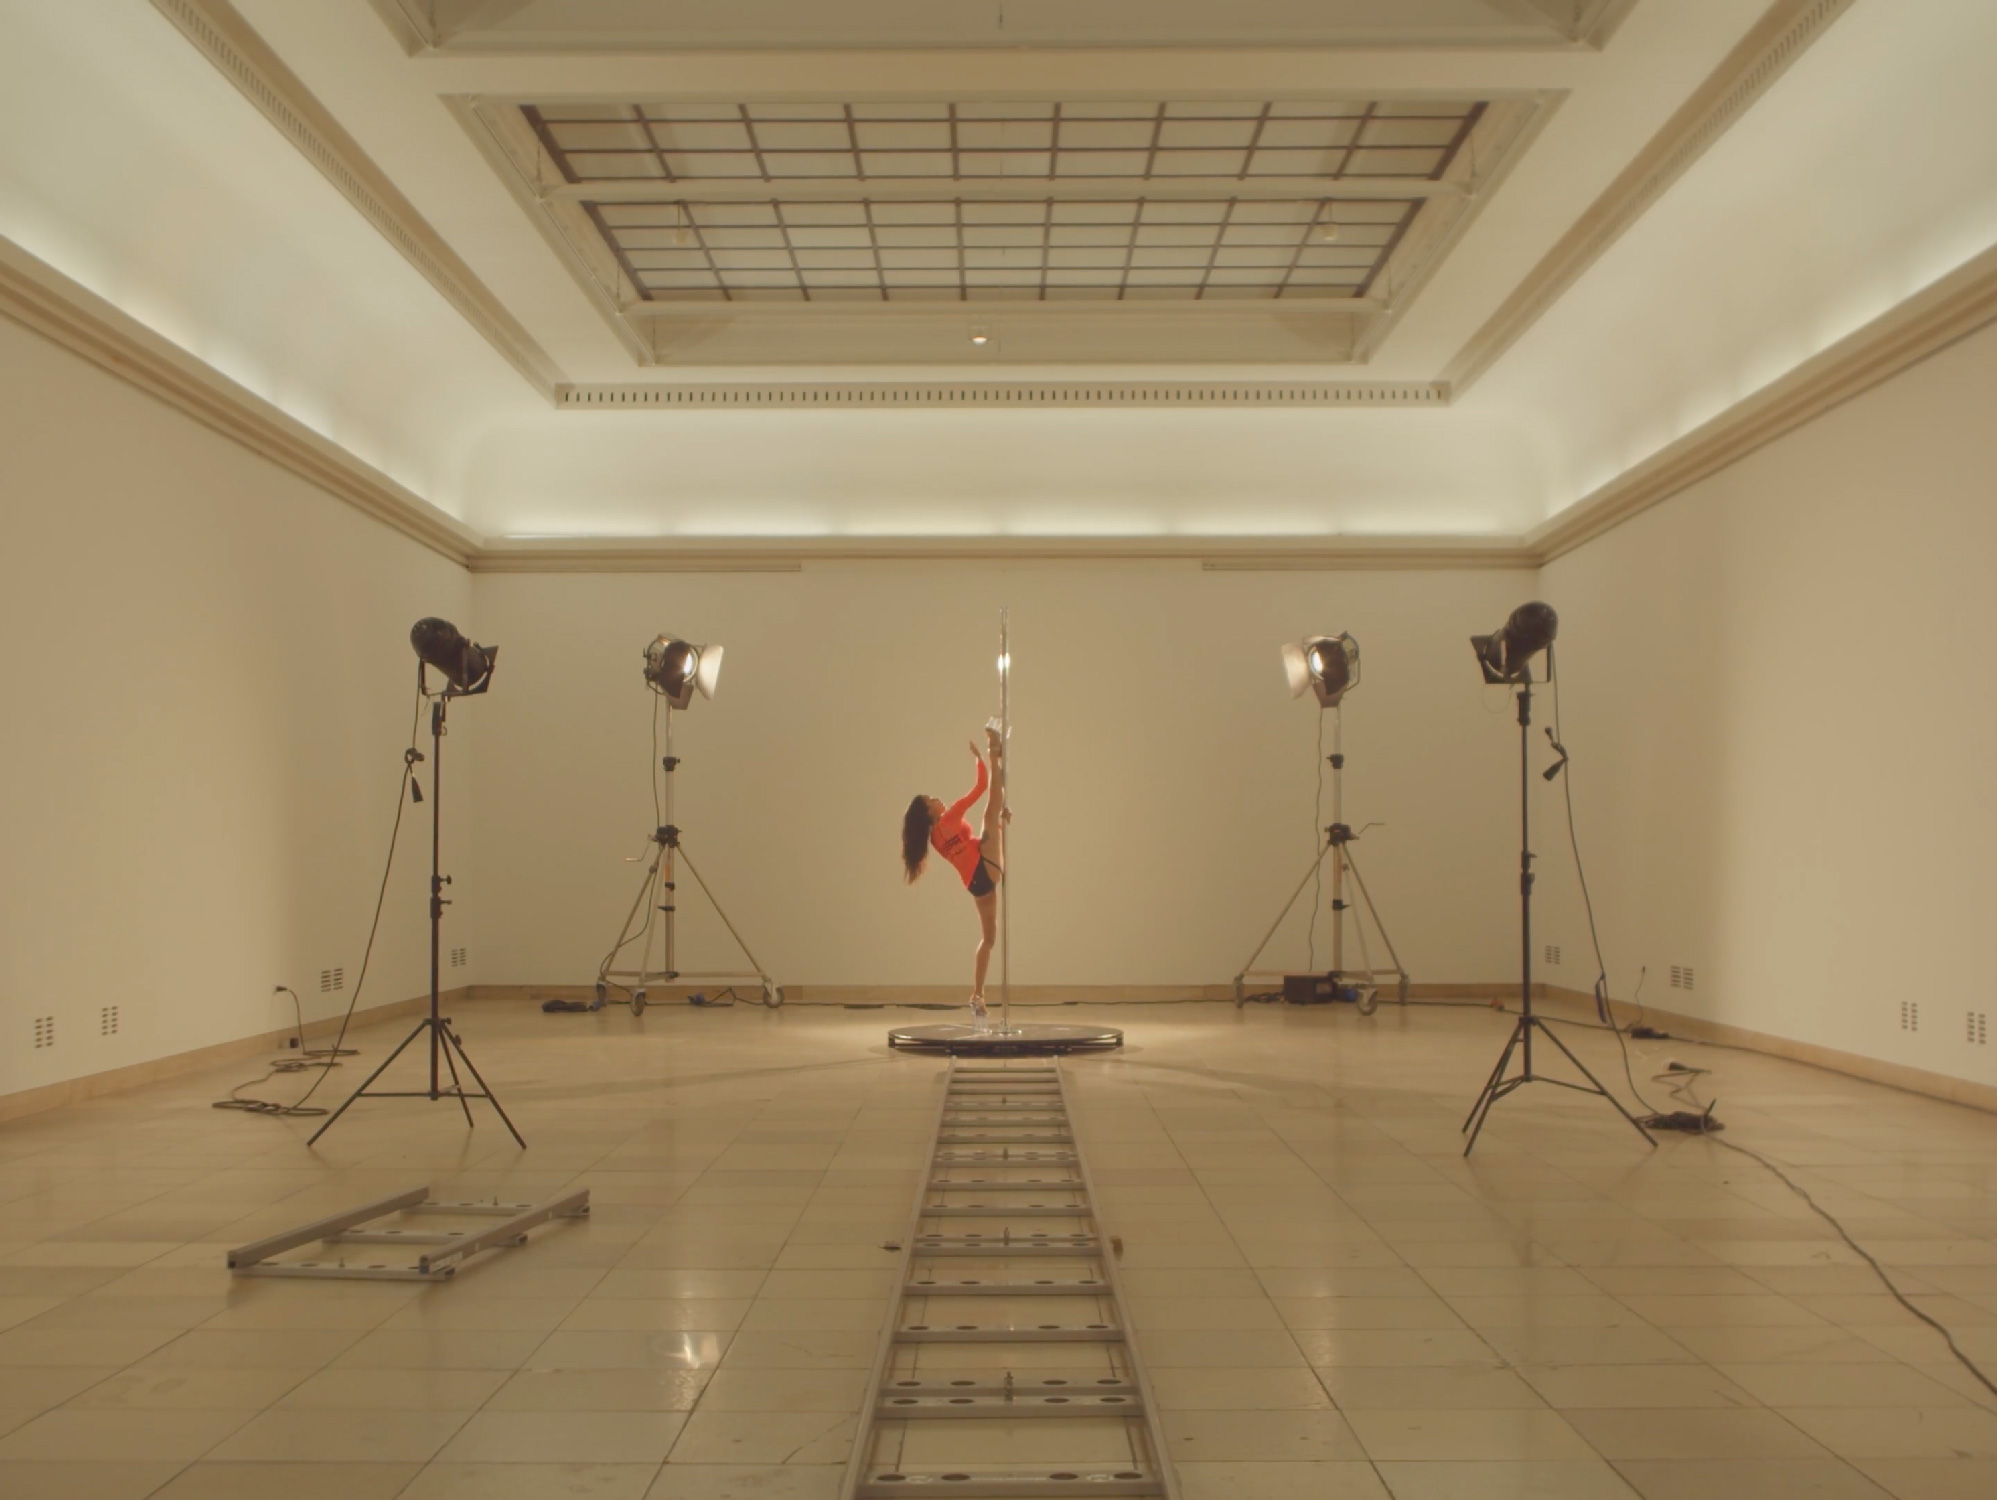 A large indoor space with four bright studio lights pointing inward at a sigular pole kept in the center. There is a person with curly blonde hair in a dance pose on the pole, with one leg and one arm vertically resting on the pole.